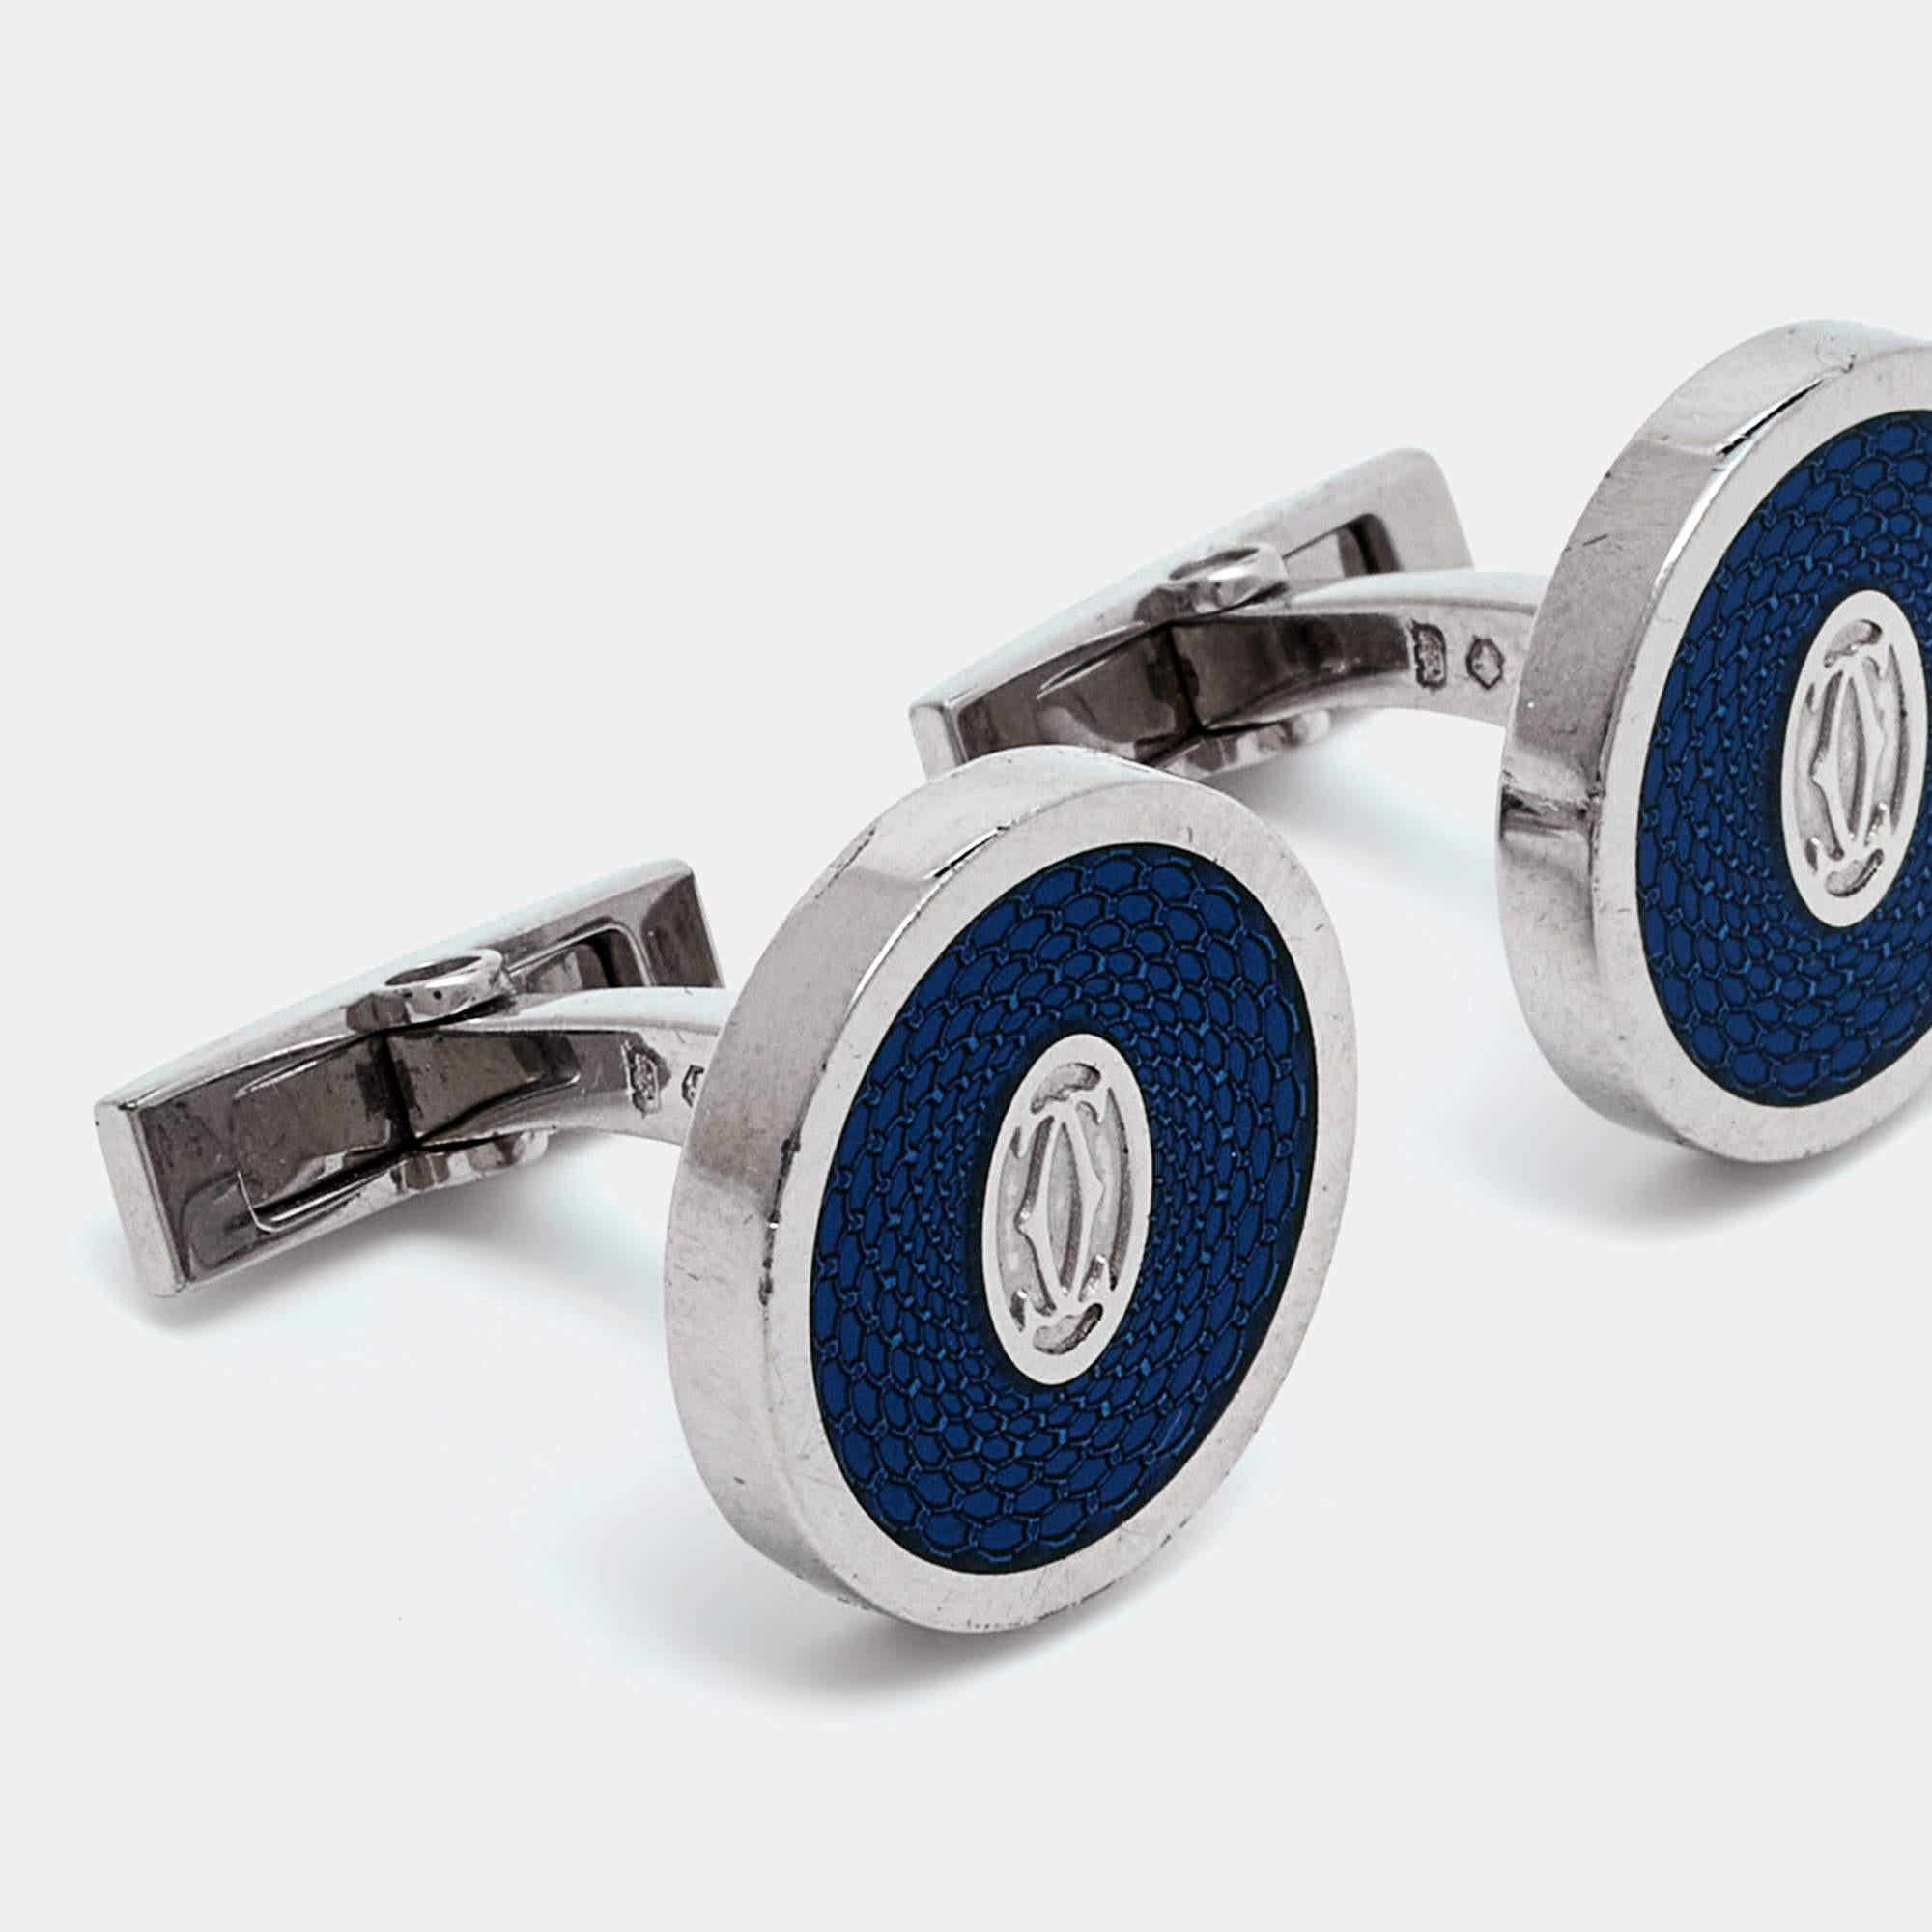 The ideal pick to complement not just your style but your personality as well are these cufflinks from Cartier. They are made from silver 925 and detailed with their double C logos, lending the pair a timeless appeal.

